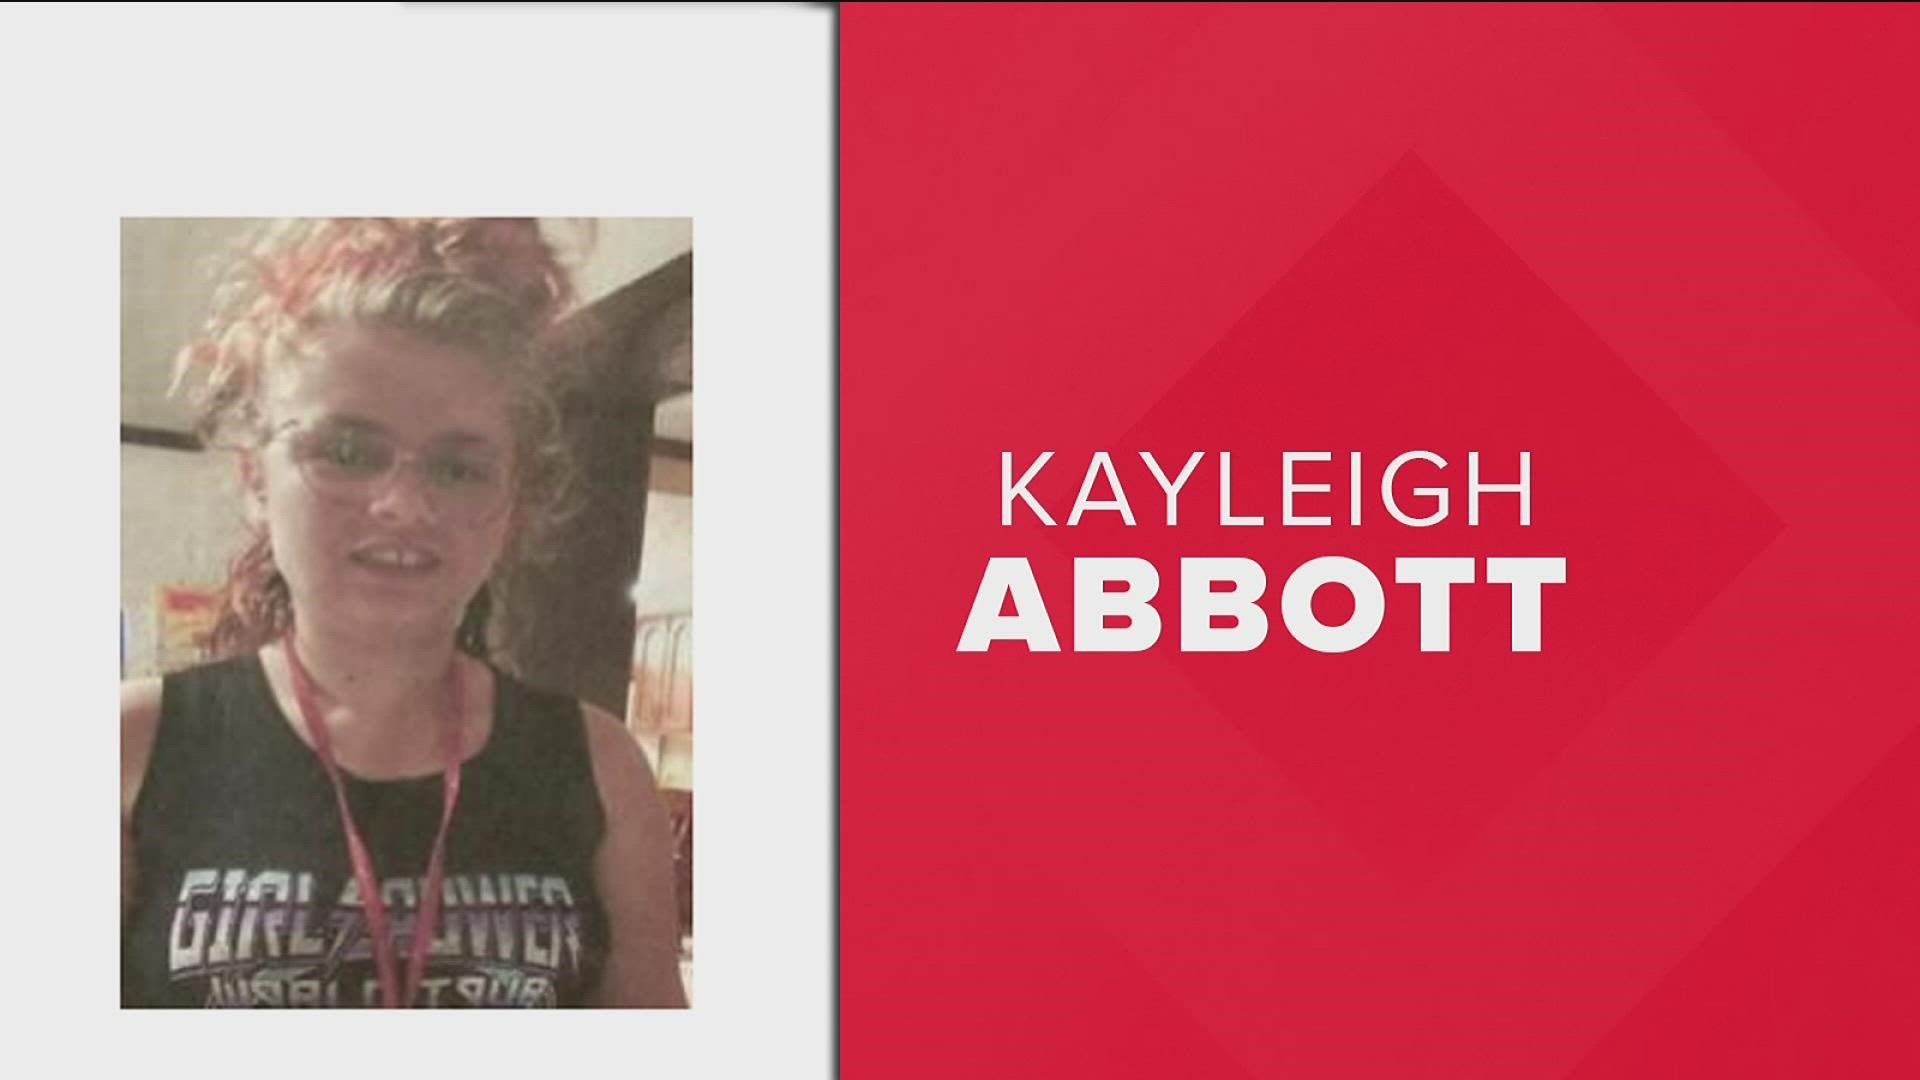 11Alive's Investigative team, The Reveal, has previously shared coverage of Kayleigh's story.